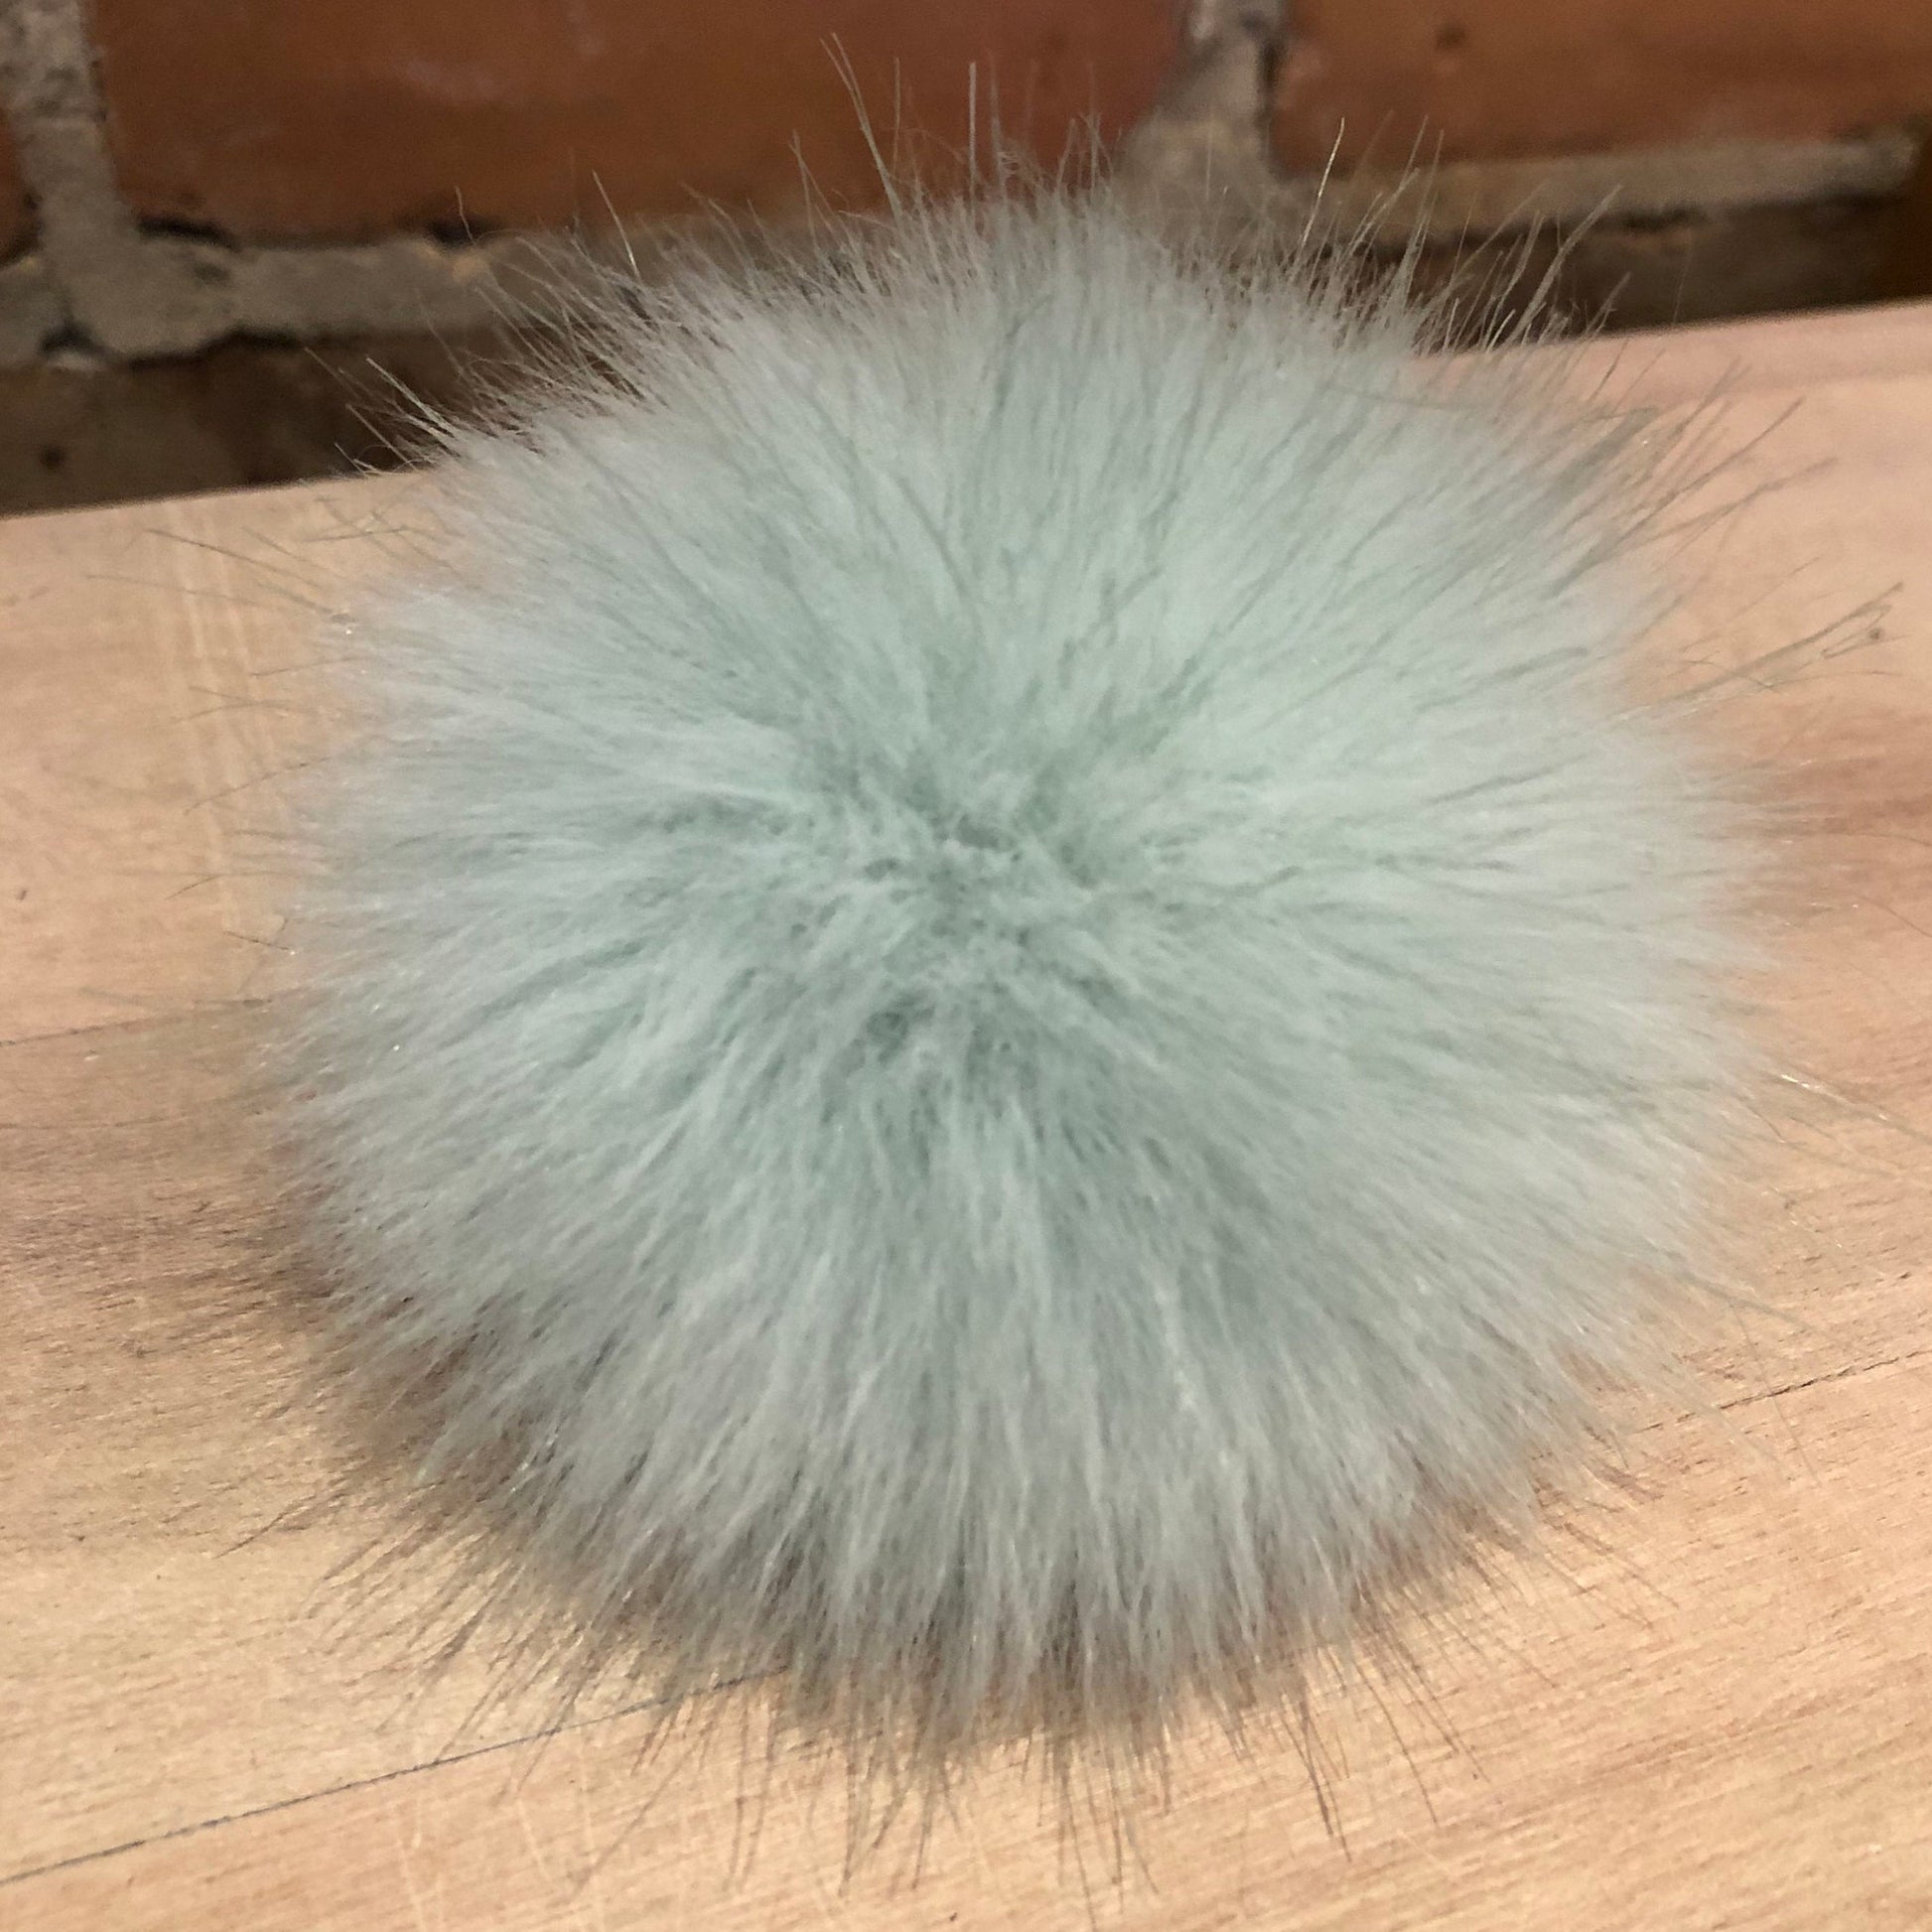 Small Mint Green Faux Fur Pom Pom for Baby's Knit Hat